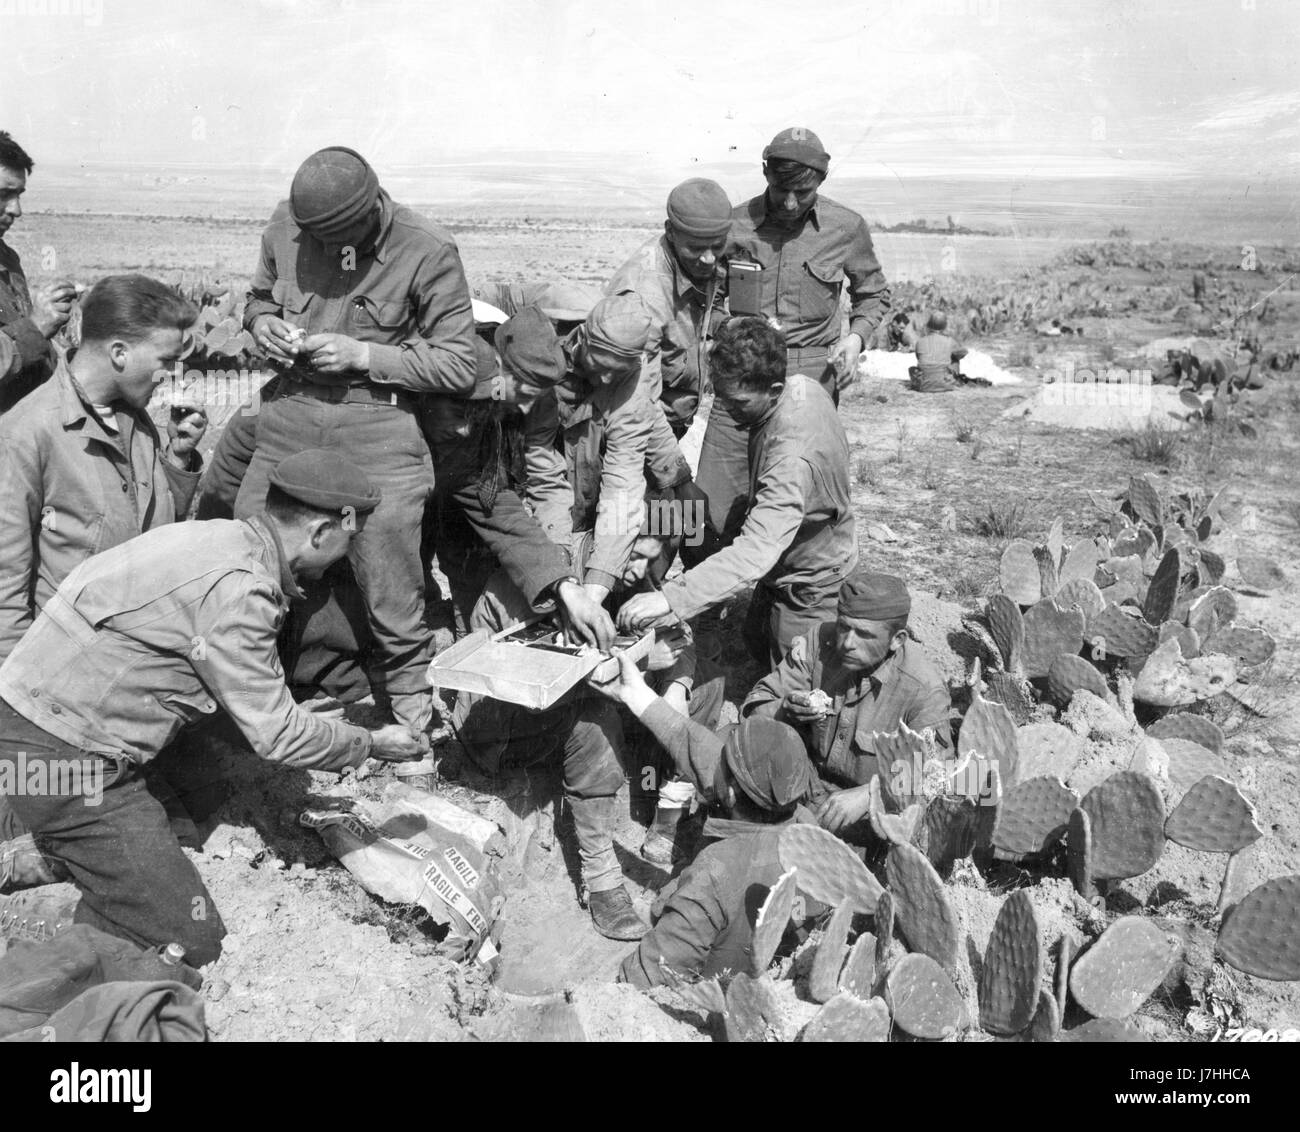 American front line troops have received US Mail from home, and one man is sharing his package of food with his buddies.  Tunisian desert, Africa WW II - Feb. 20, 1943.  To see my other vintage WW II images, Search:  Prestor  vintage   WW II Stock Photo